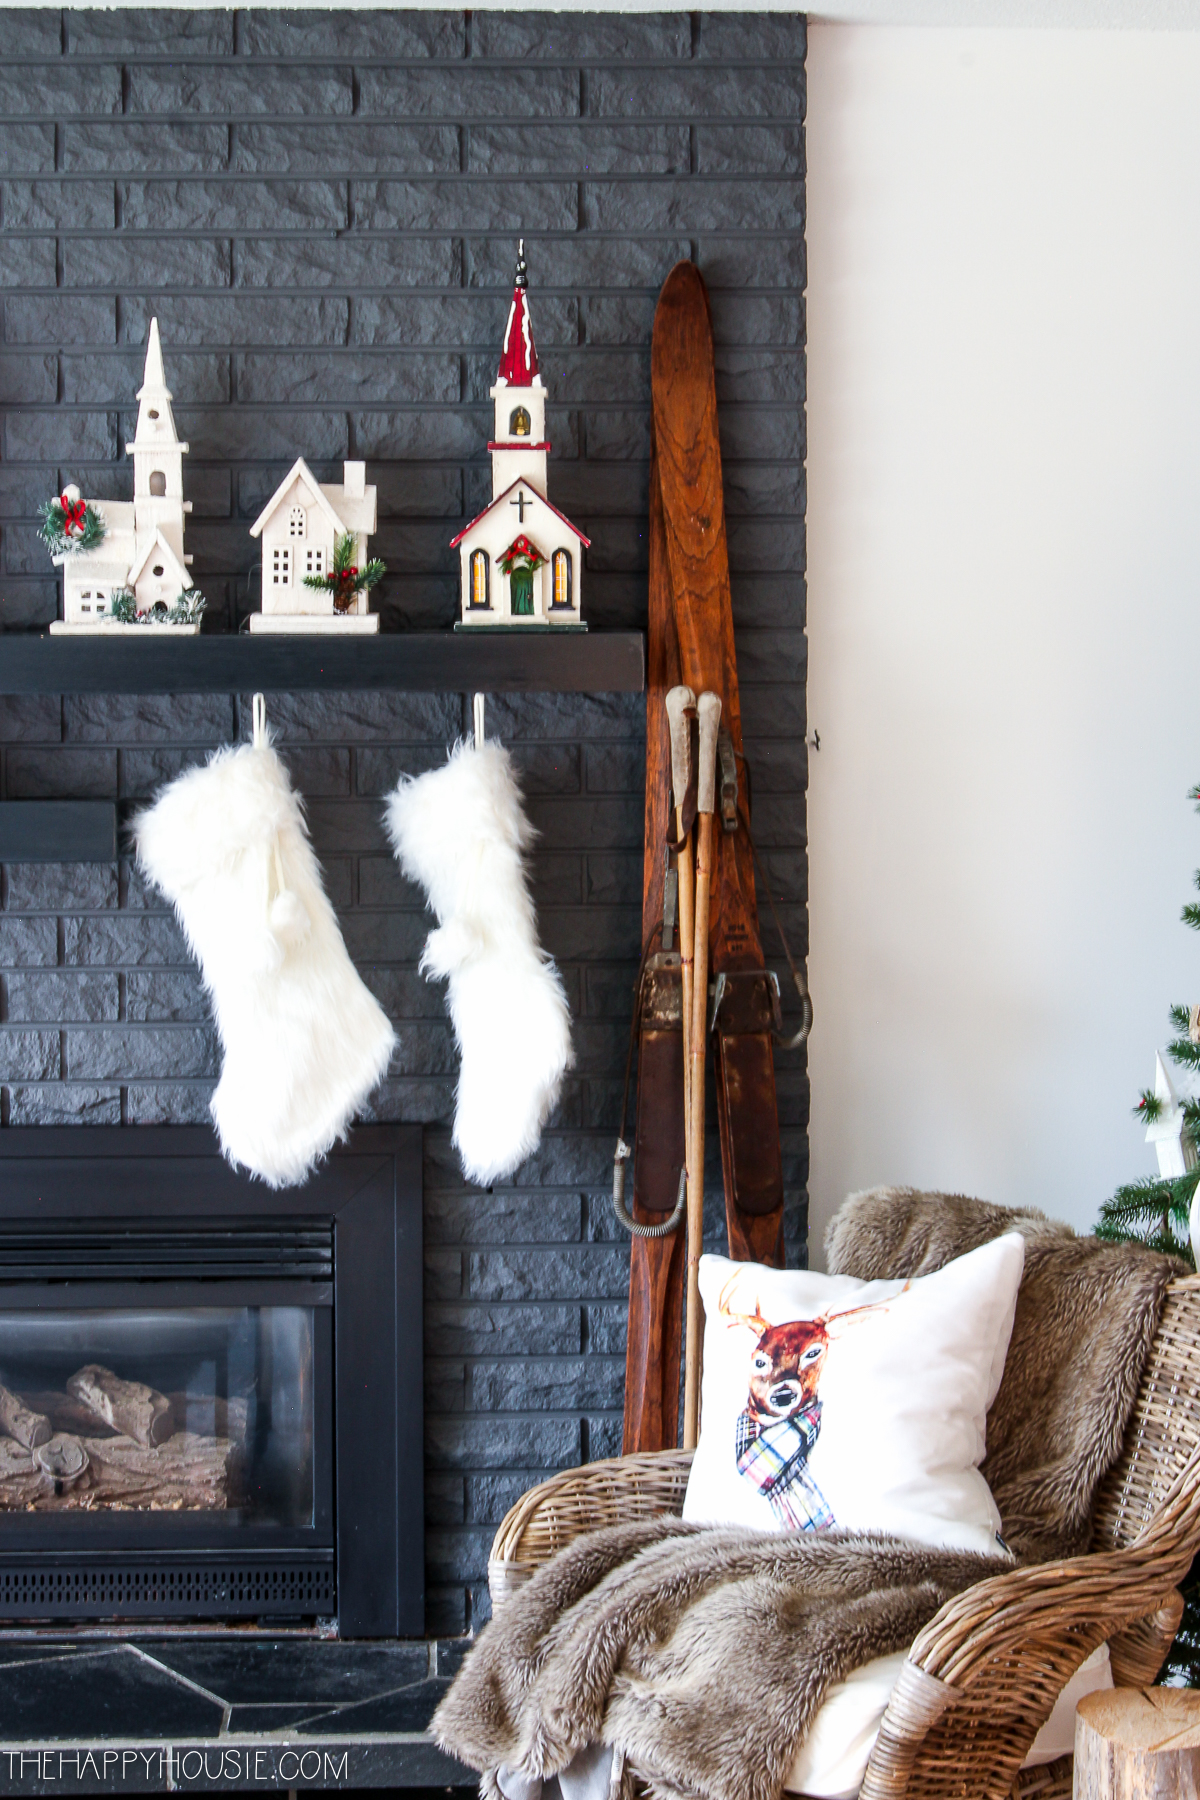 There is a white pillow with a deer on it on the chair beside the fireplace.